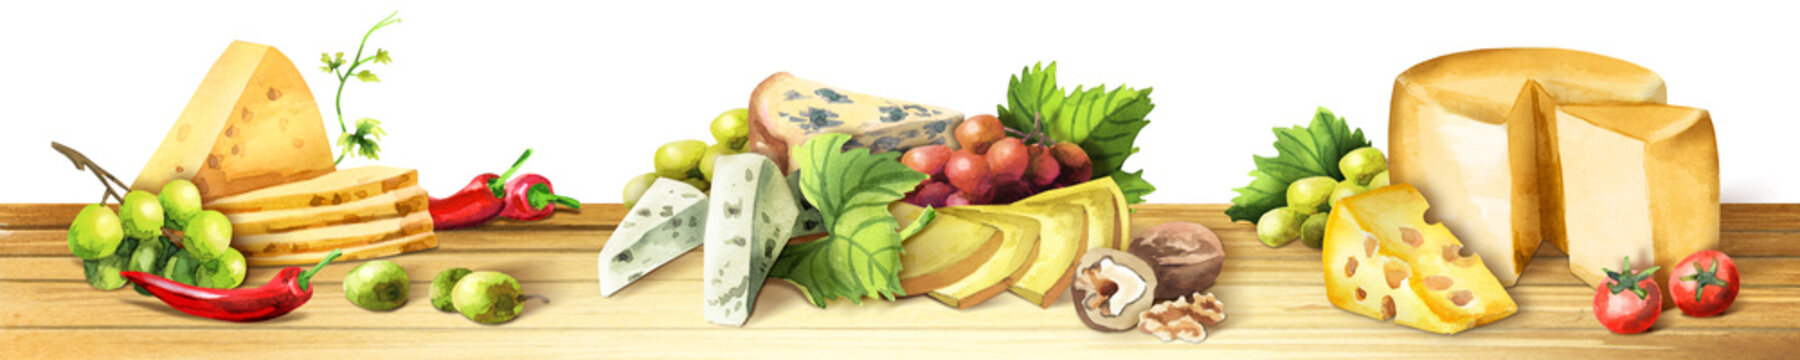 Panoramic image of cheese and grapes on a white background. Can be used for kitchen skinali. Watercolor